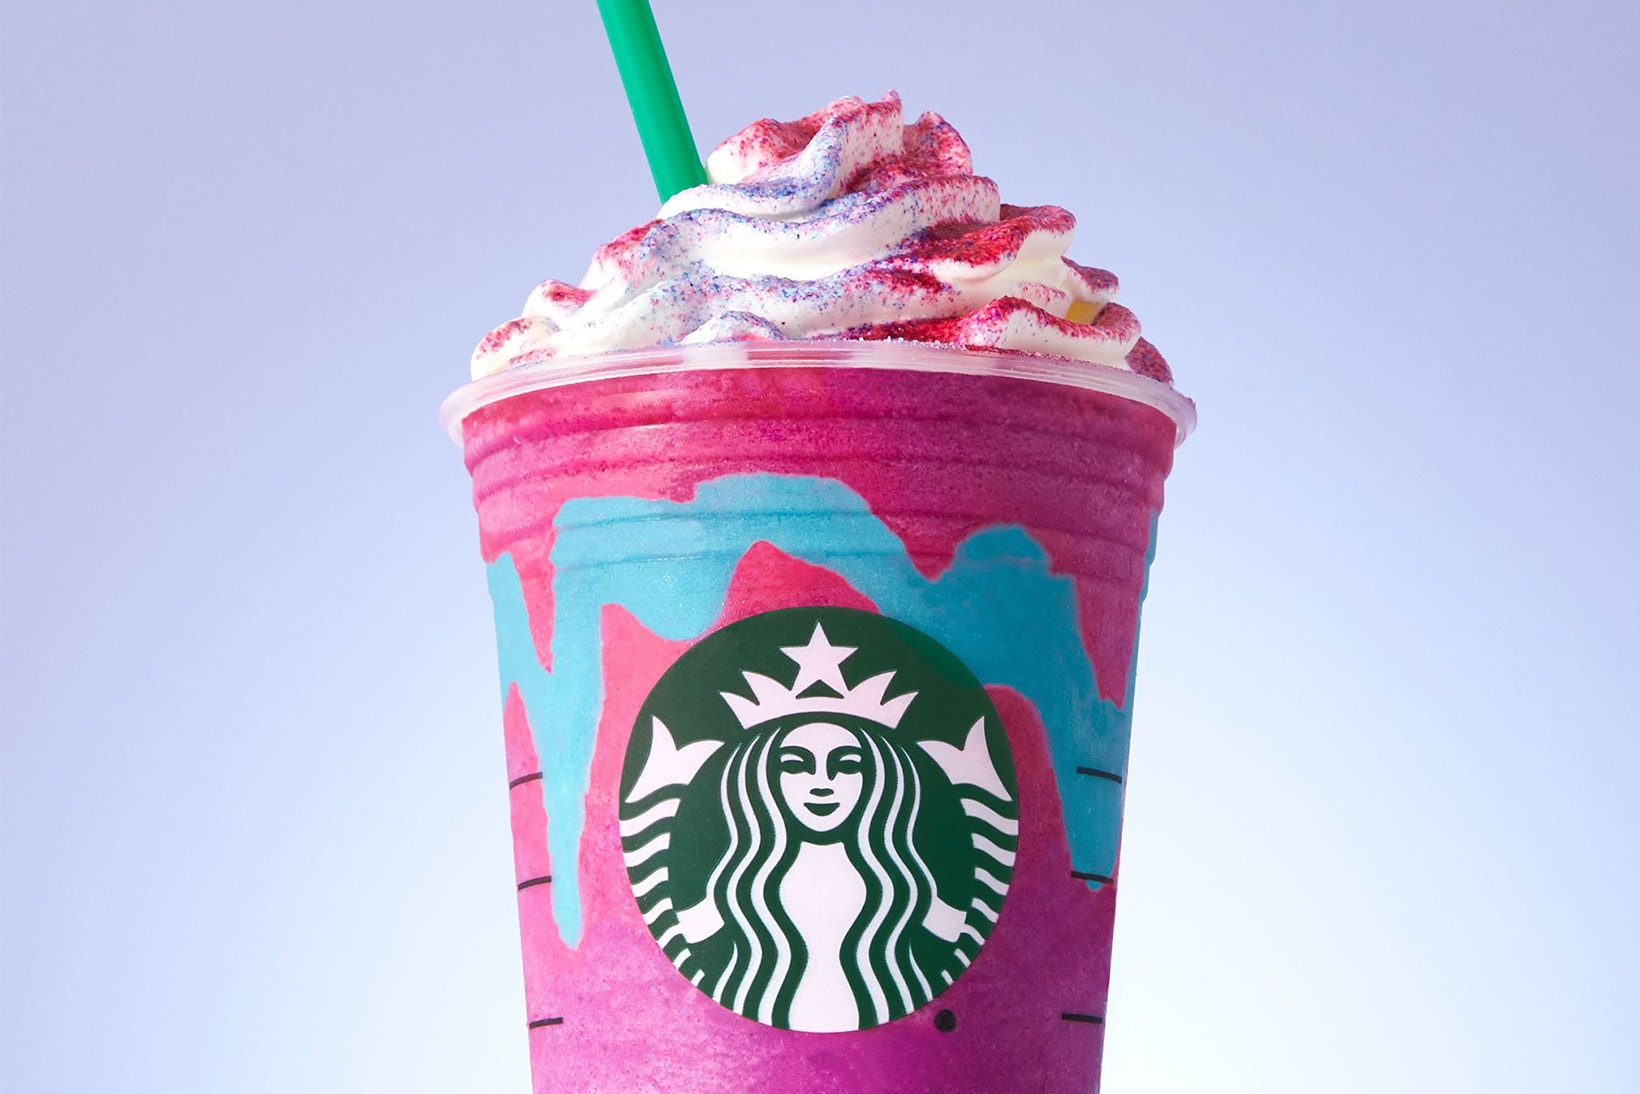 Starbucks Crystal Ball Unicorn Frappuccino coming soon release date info